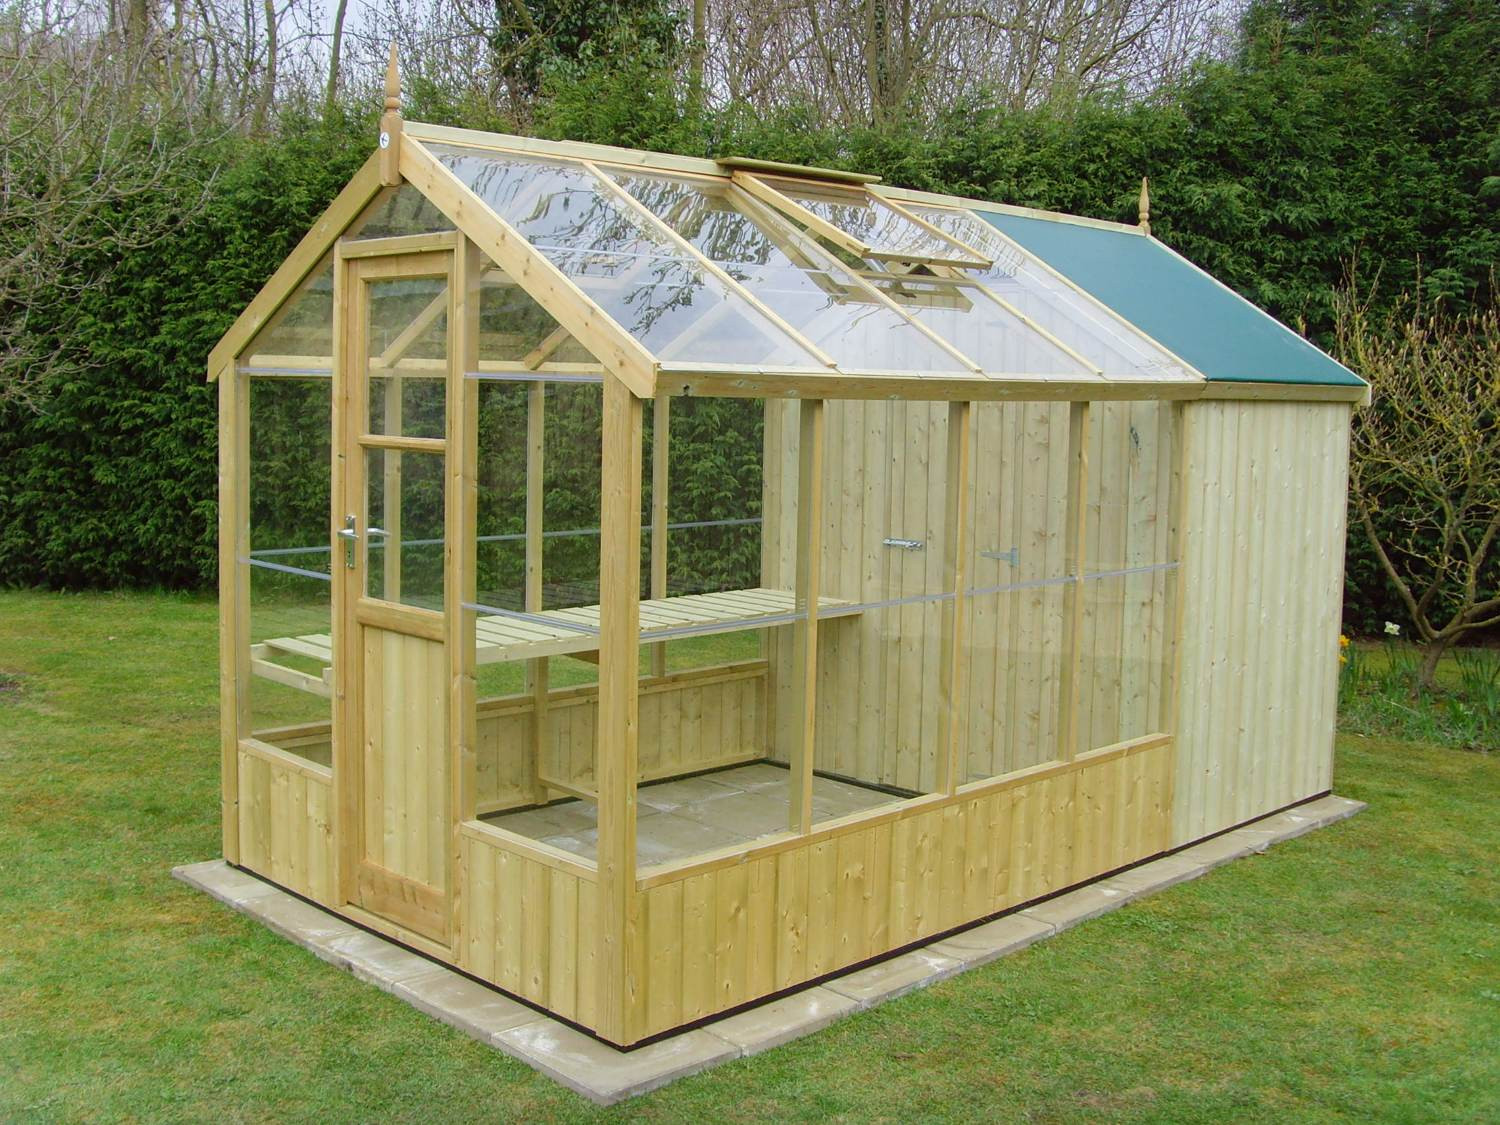 Backyard Greenhouse Plans
 20 x 10 garden shed greenhouses in ohio Must see